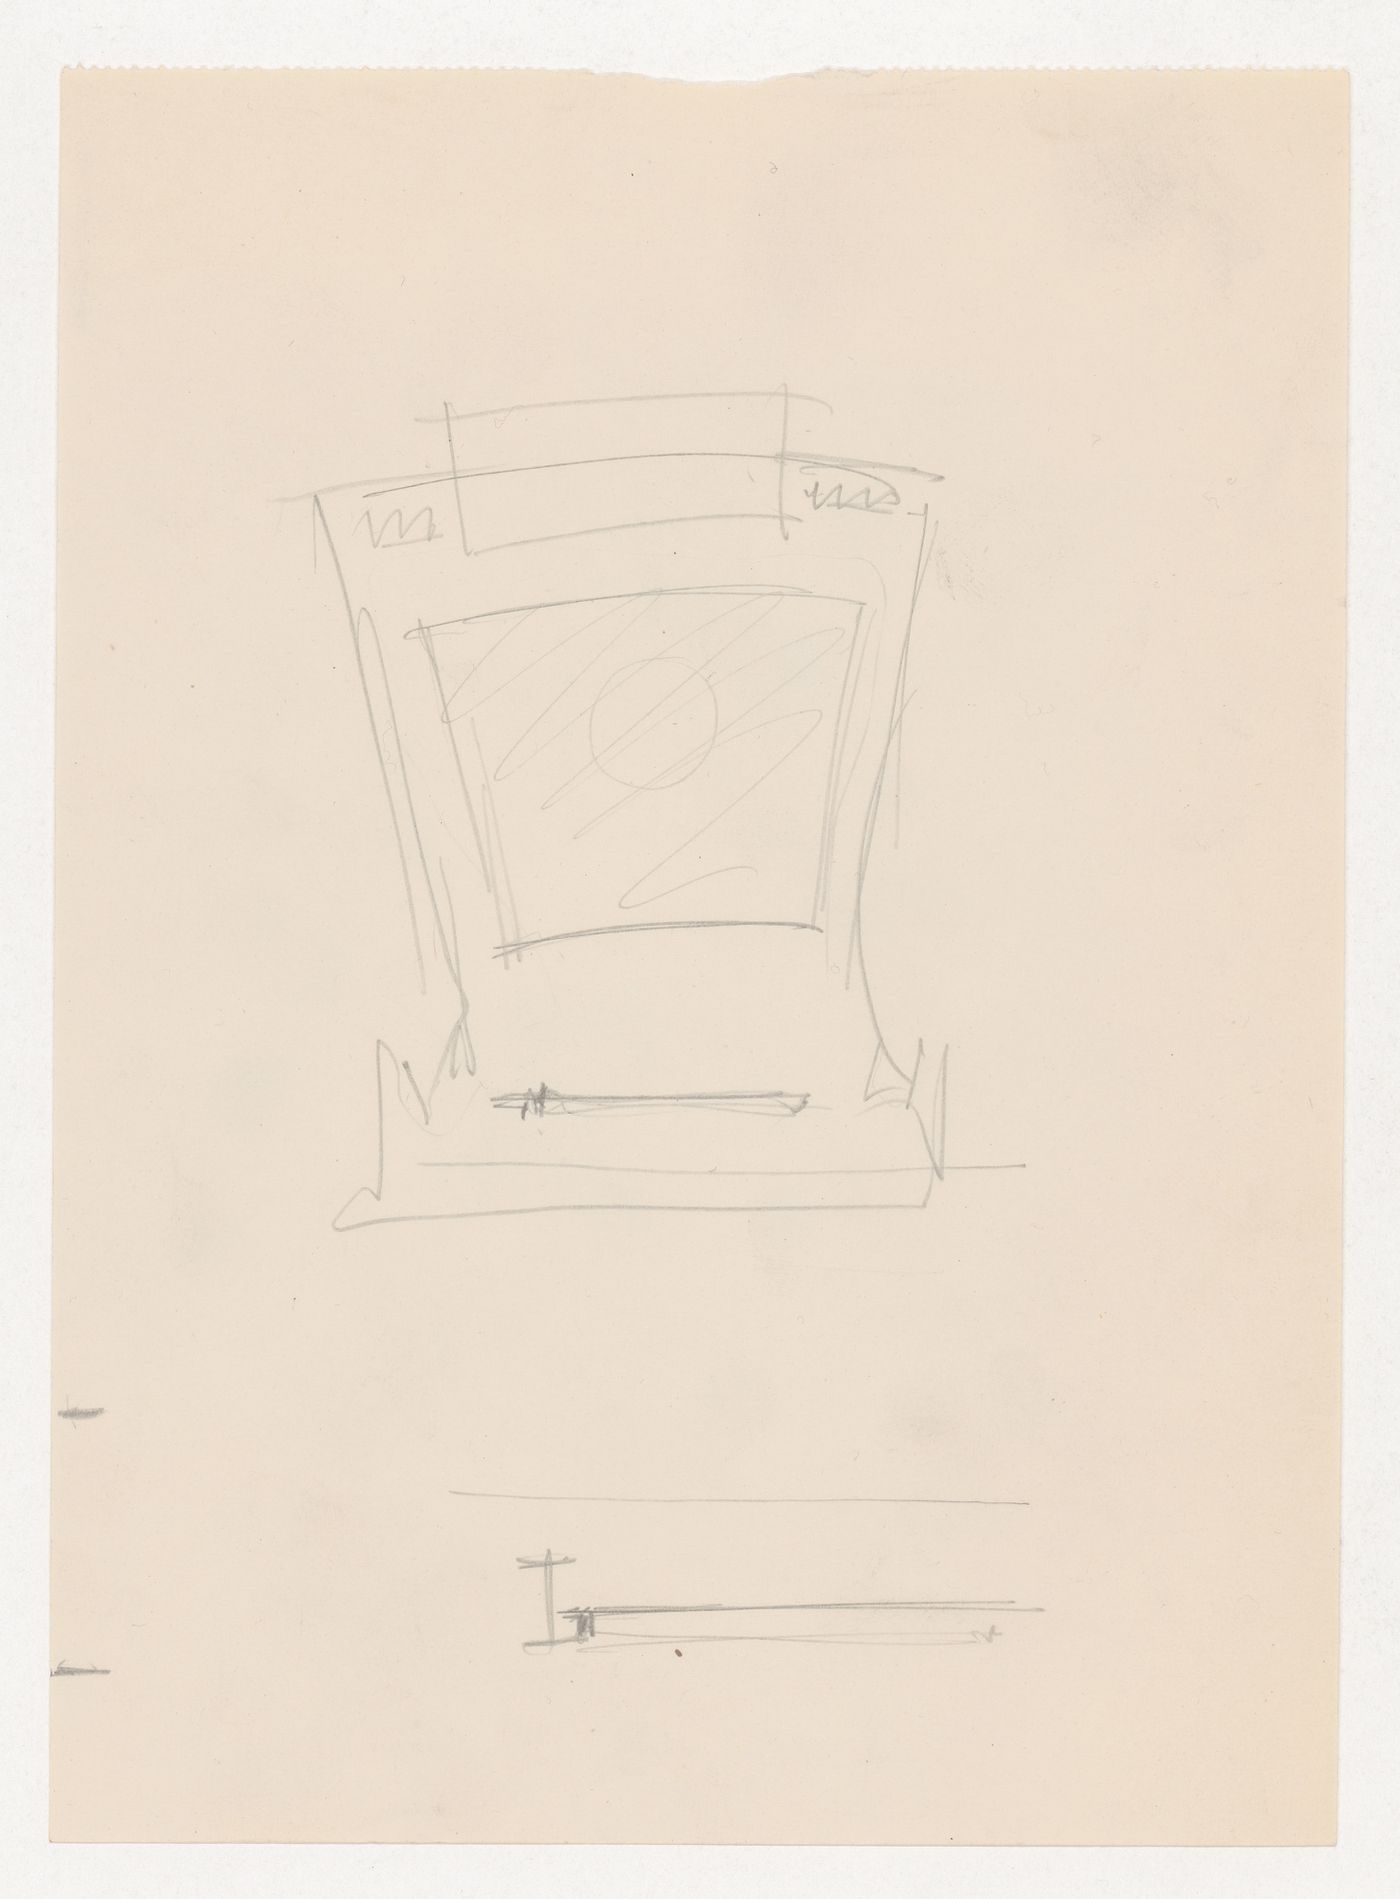 Sketch plan for an auditorium and unidentified sketch for the Metallurgy Building, Illinois Institute of Technology, Chicago